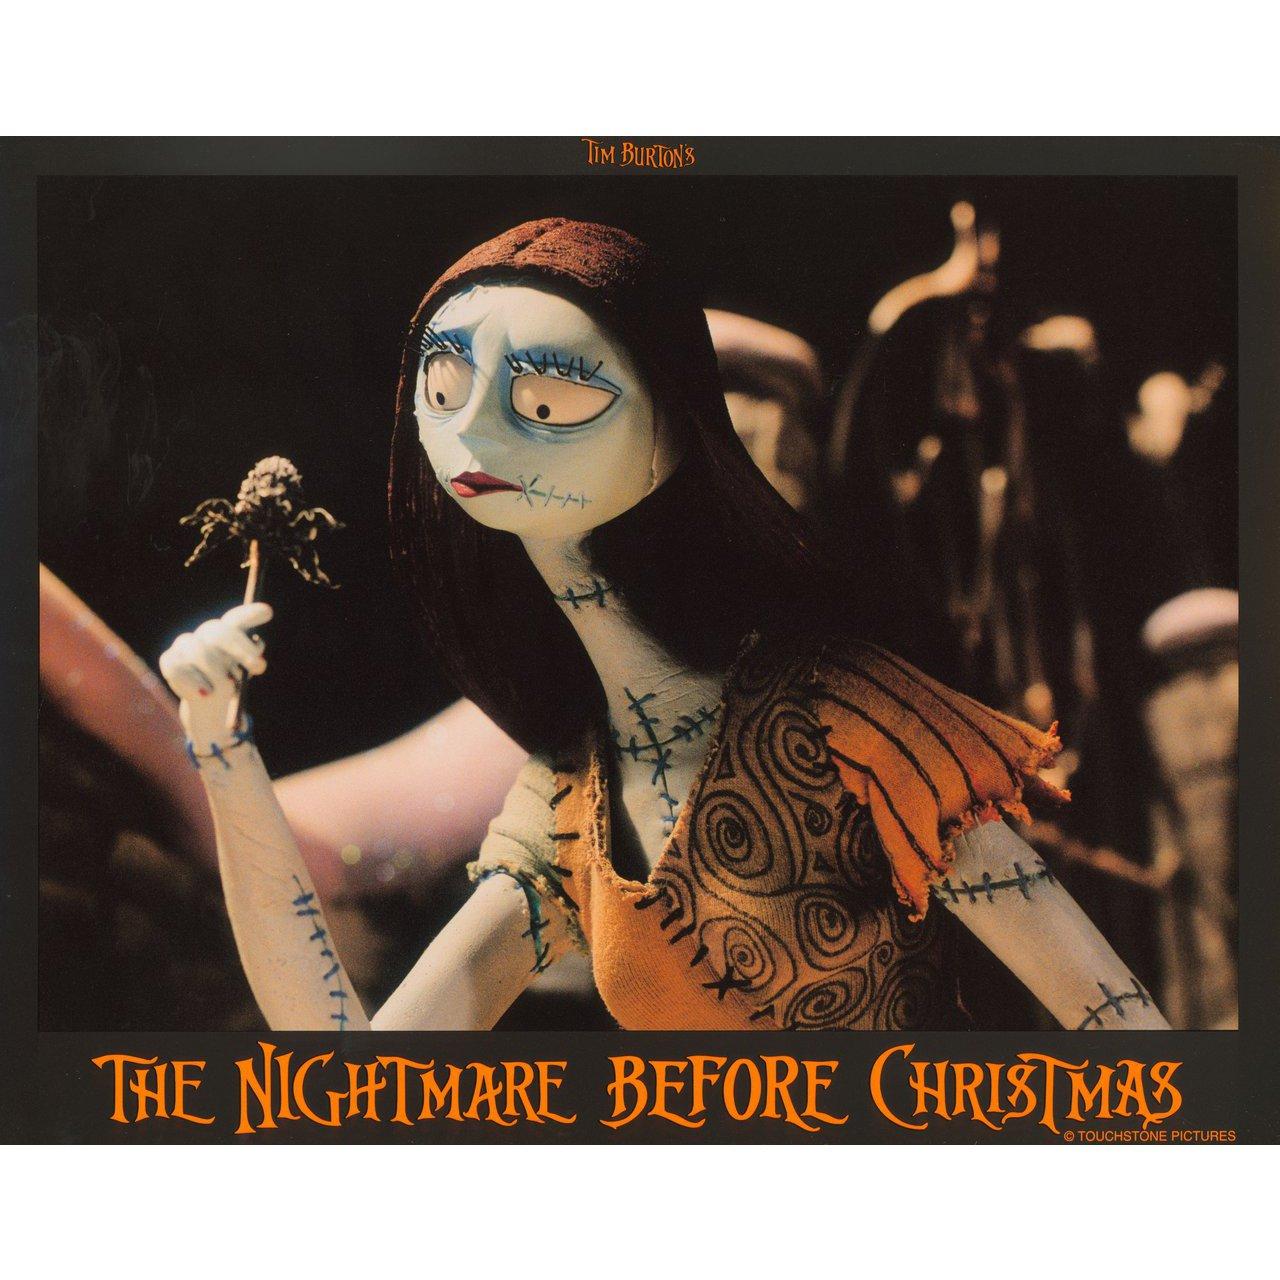 Original 1993 U.S. lobby card set for the film The Nightmare Before Christmas directed by Henry Selick with Danny Elfman / Chris Sarandon / Catherine O'Hara / William Hickey. Fine condition. Please note: the size is stated in inches and the actual